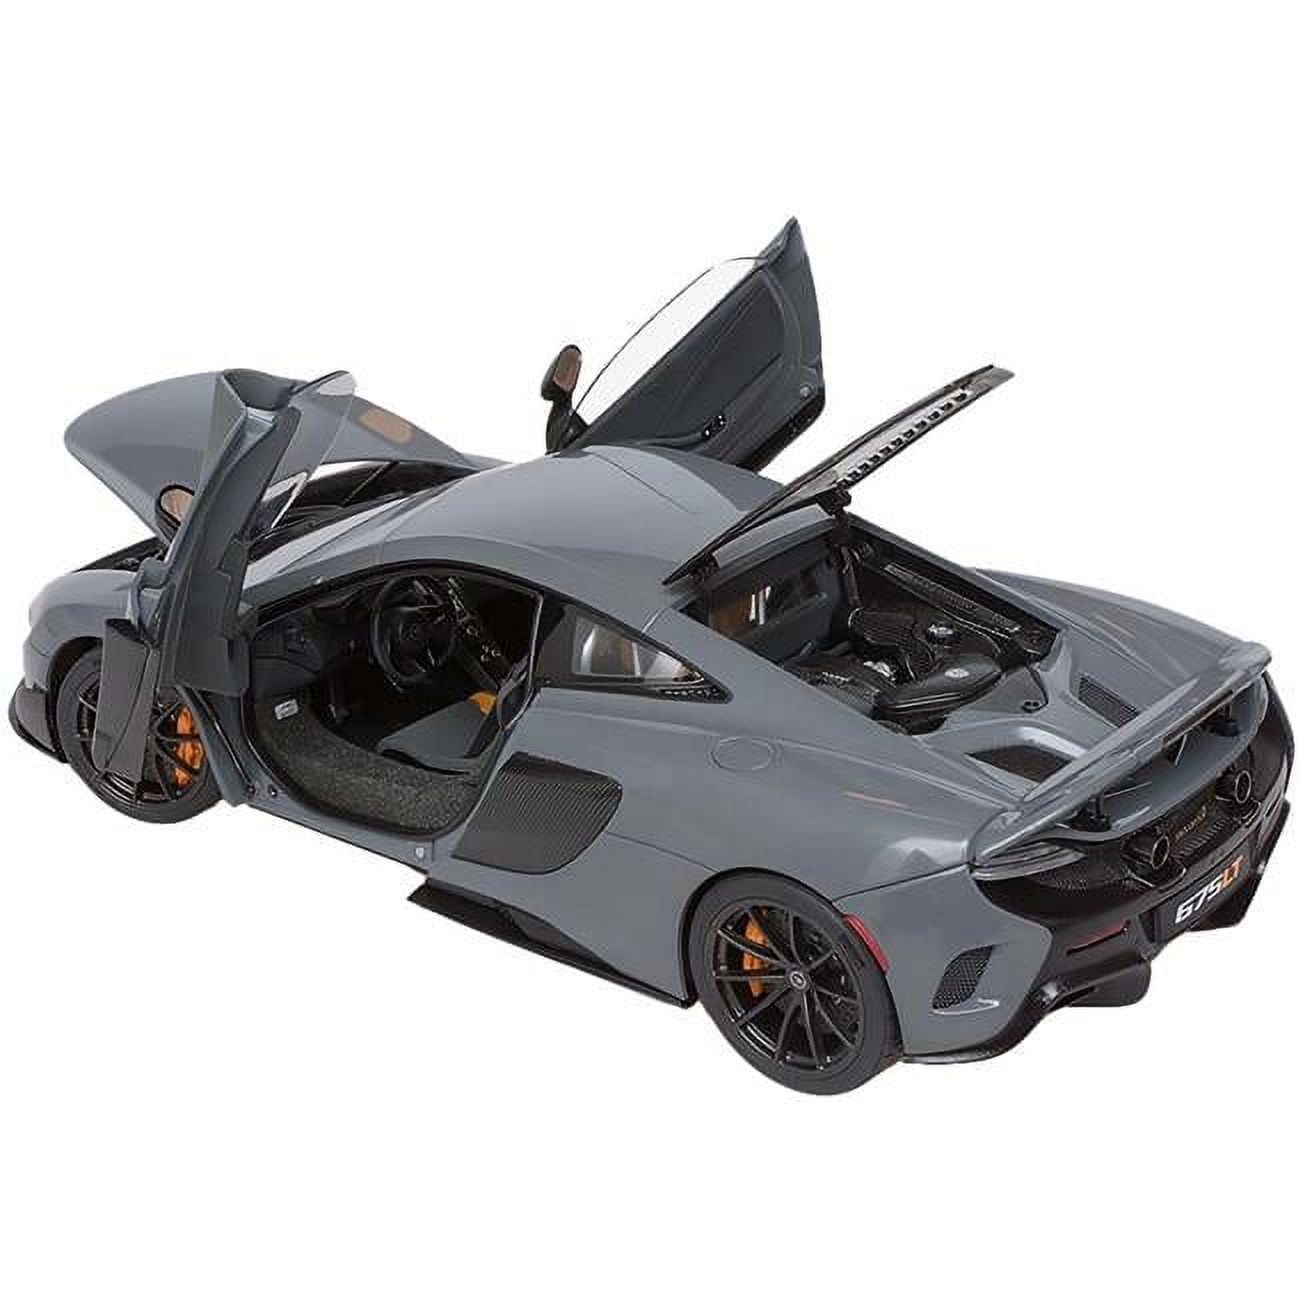 Picture of Autoart 76047 Mclaren 675LT Chicane 1 by 18 Scale Model Car, Gray